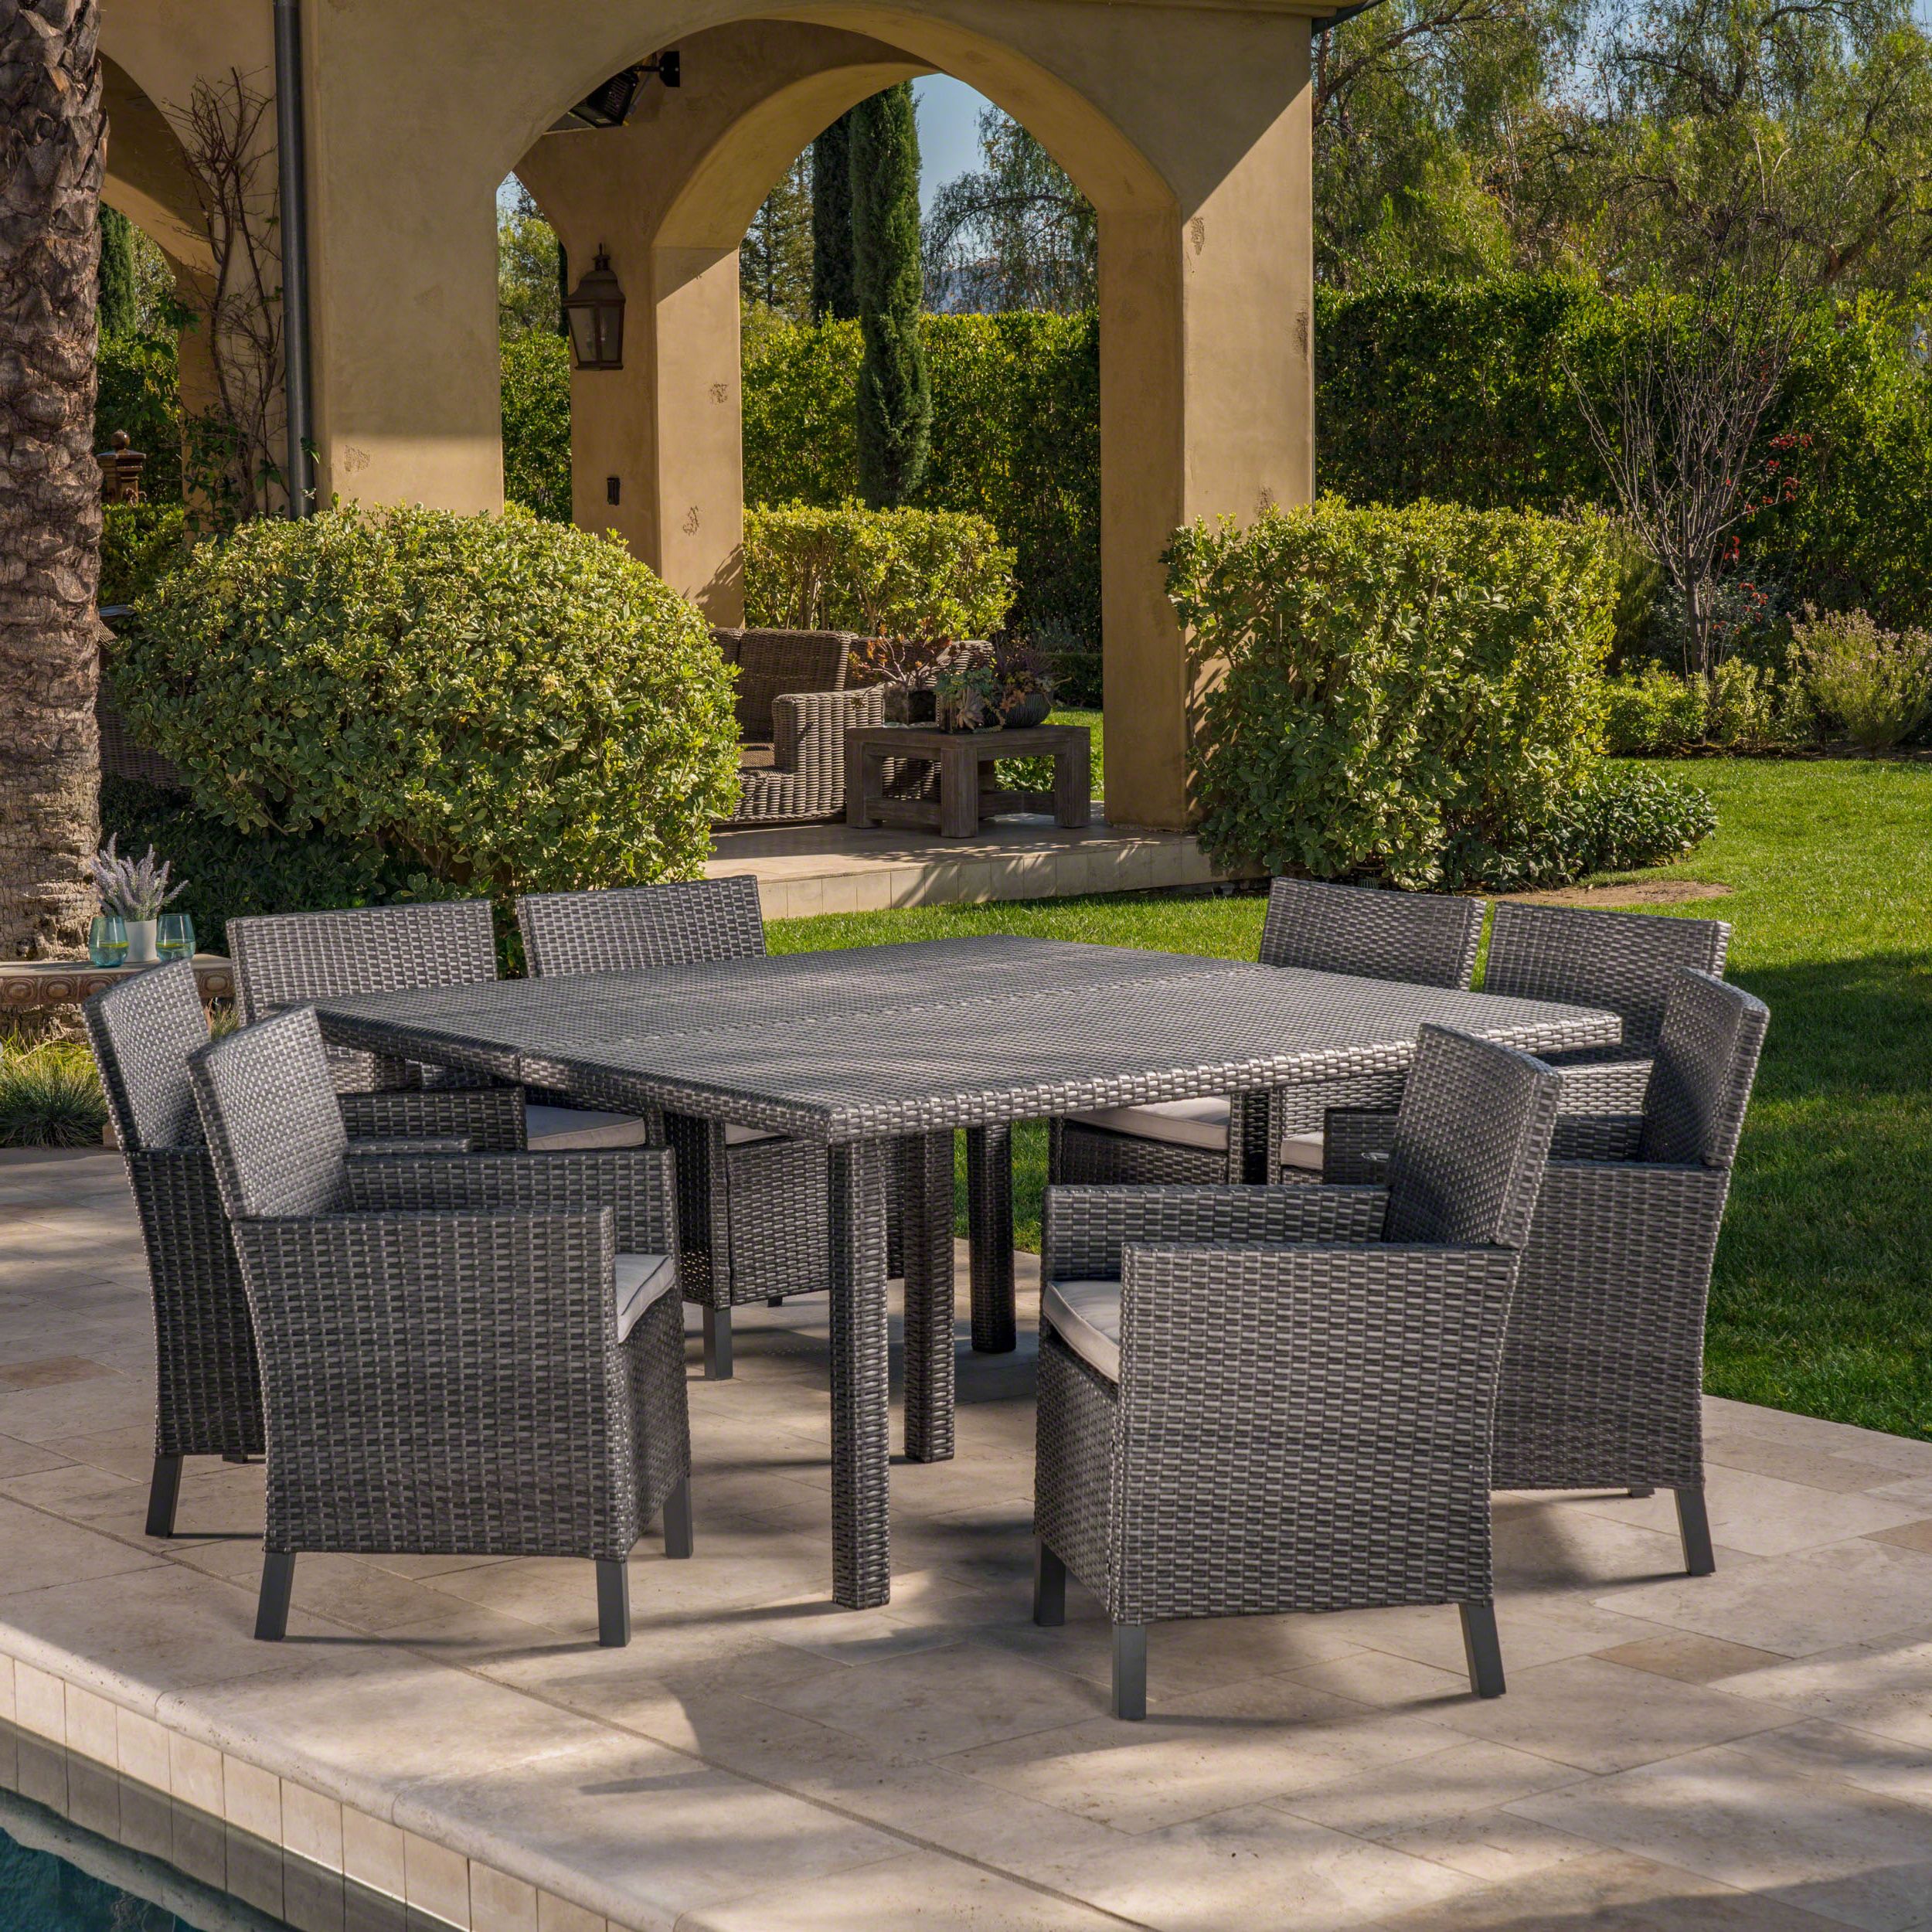 9 Piece Square Patio Dining Sets Inside 2020 Alice Outdoor 9 Piece Wicker Square Dining Set With Water Resistant (View 5 of 15)